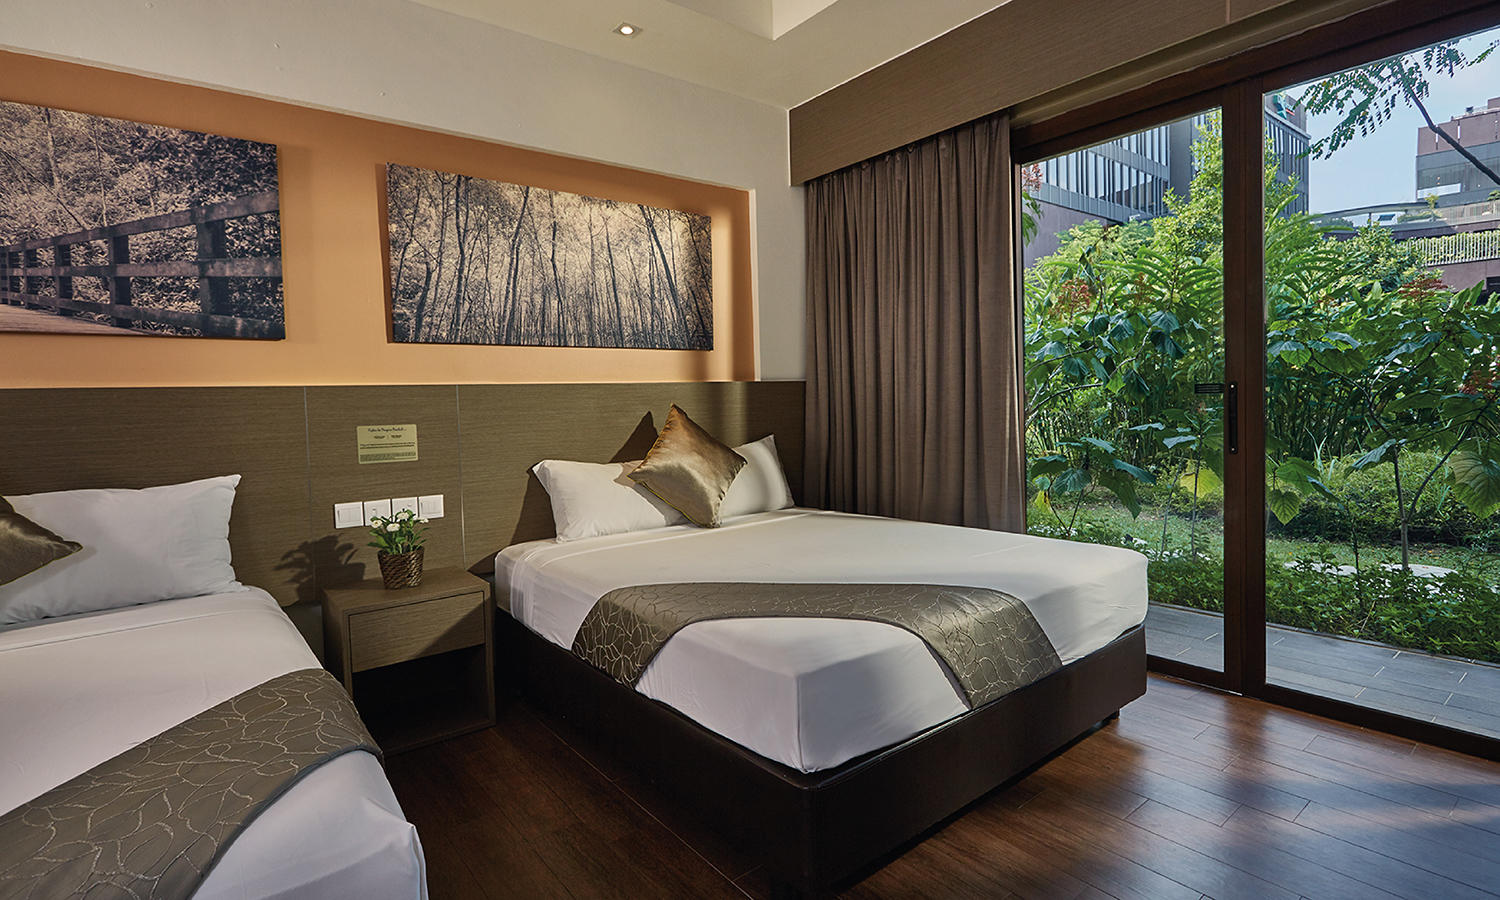 Mangrove Walk - Rooms for staycation with family & friends at D'Resort Singapore